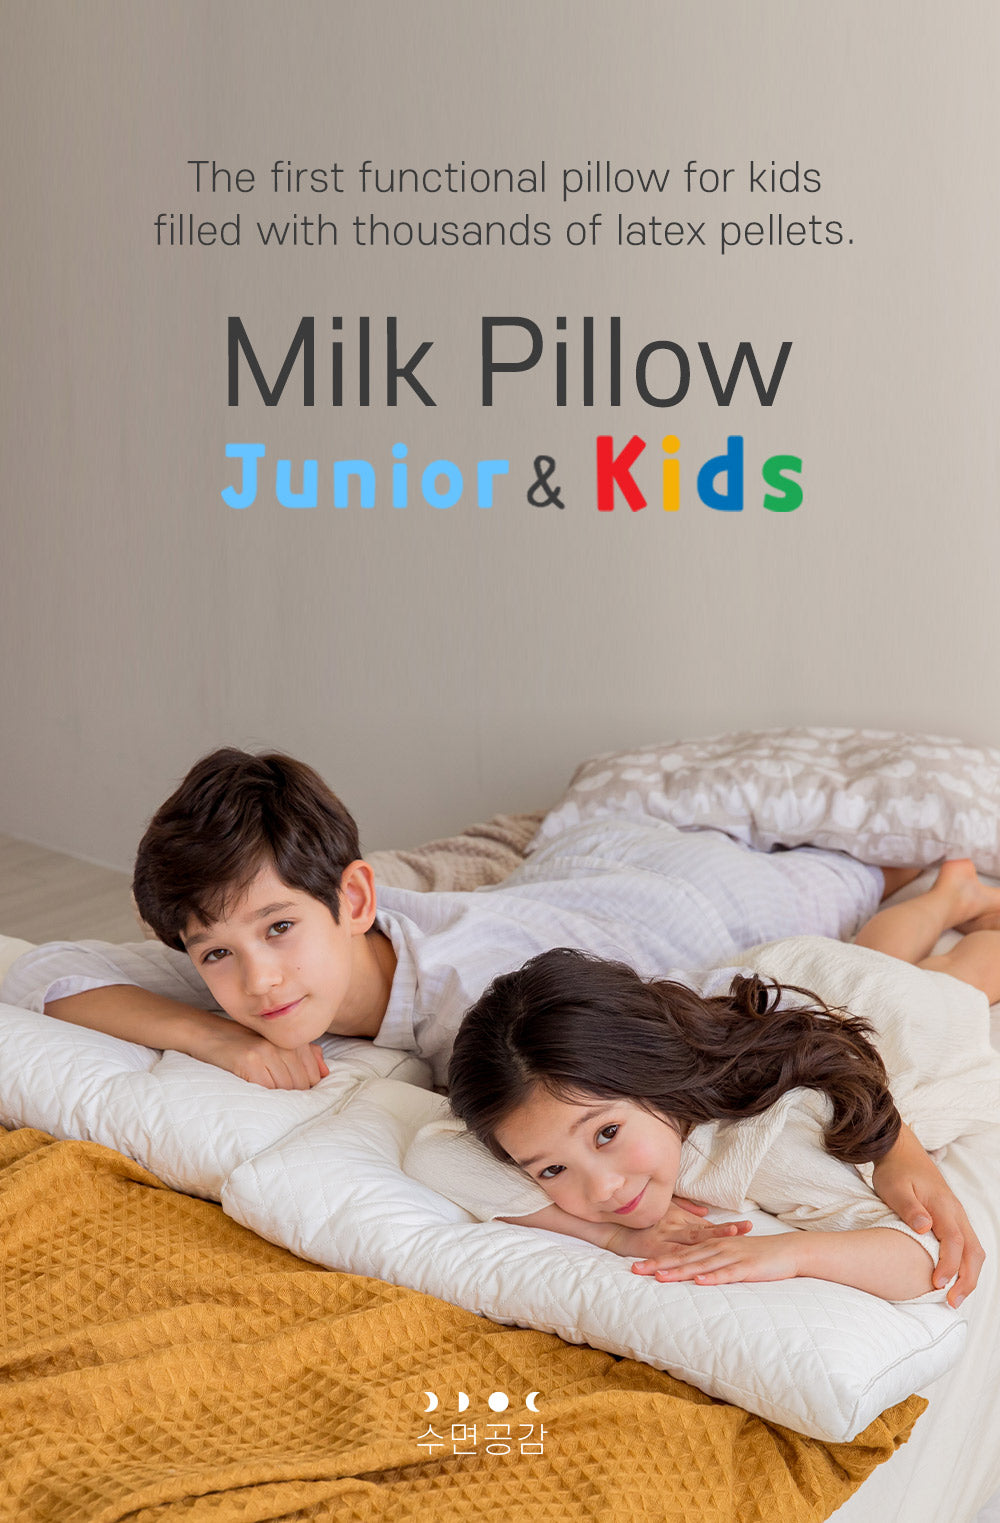 The first functional pillow for kids filled with thousands of latex pellets.